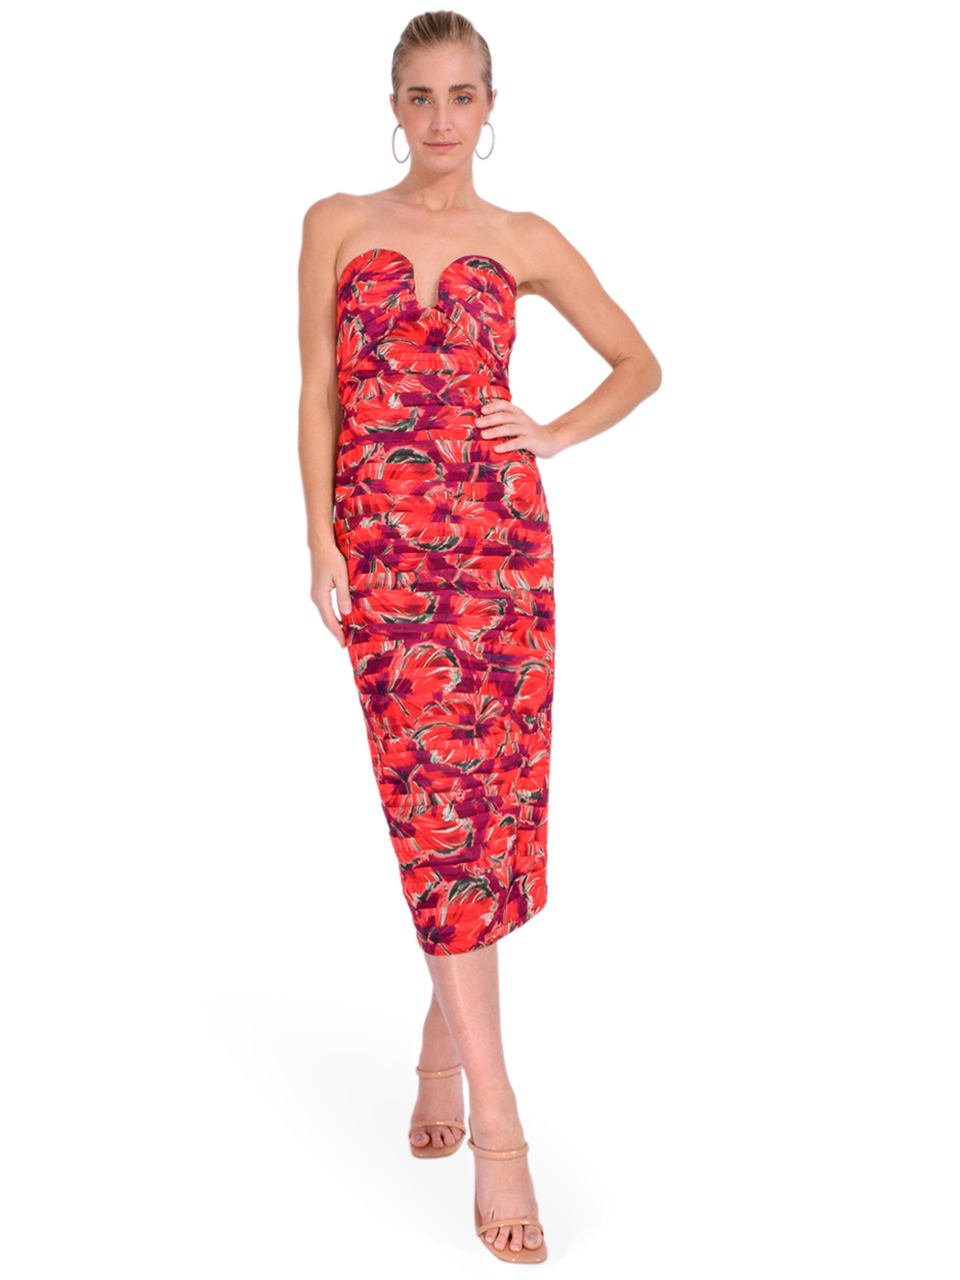 MILLY Windmill Floral Chiffon Dress in Red Multi Front View 2

